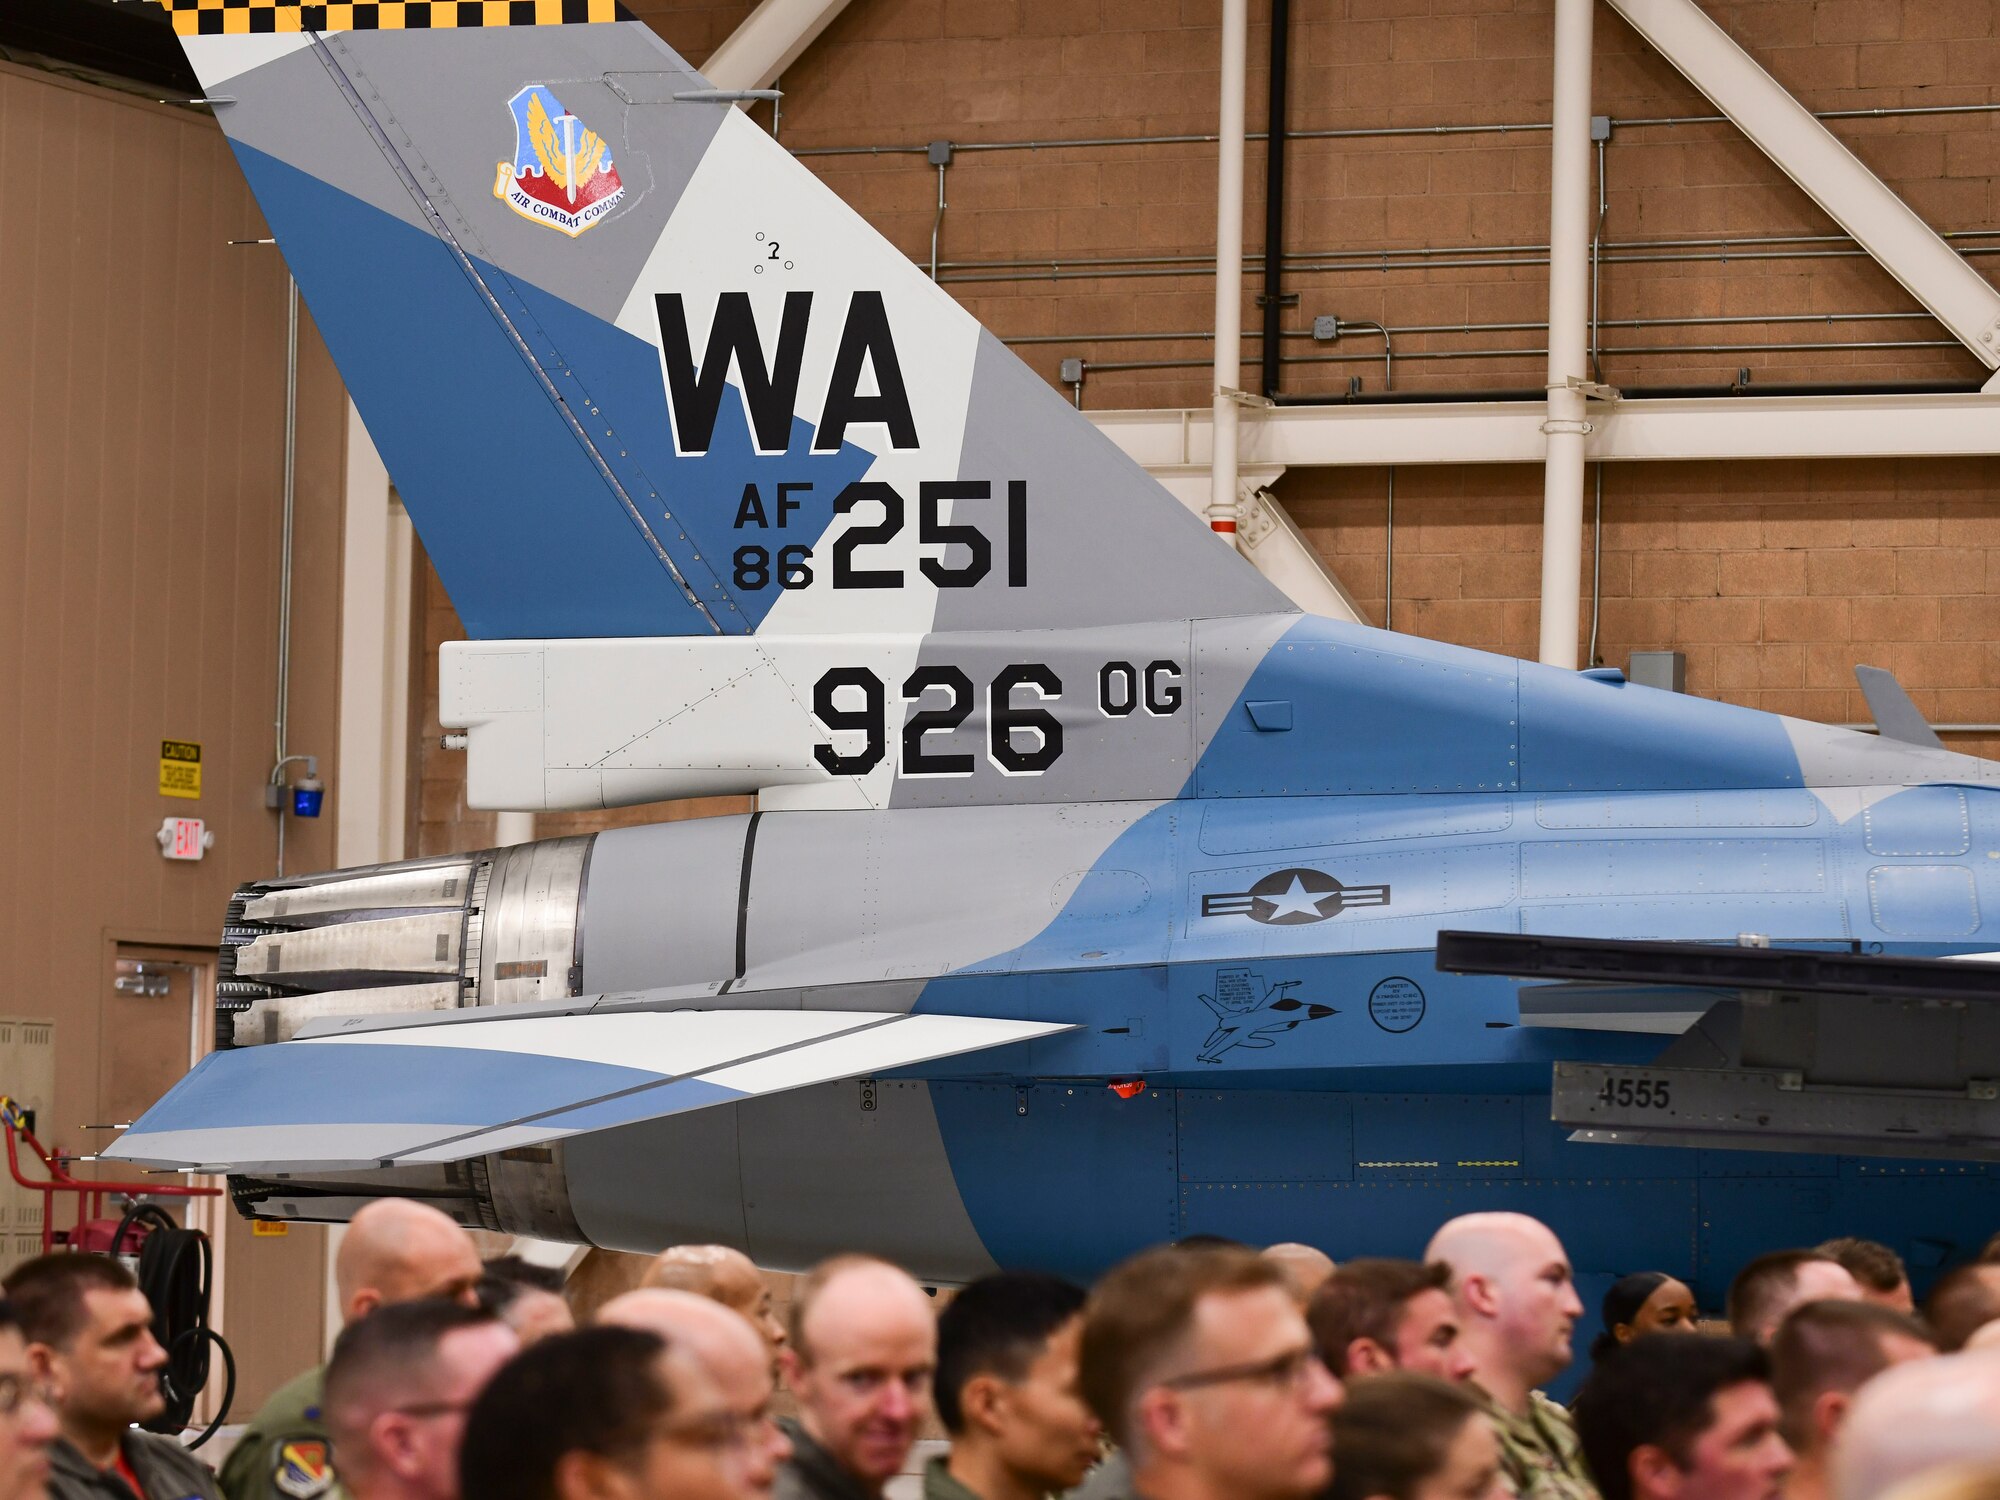 The back of a blue, gray and white-painted F-16 sits in a hangar behind the crowd during a ceremony. The tail of the aircraft reads in bold, black letters "WA, AF86, 251, 926 OG."